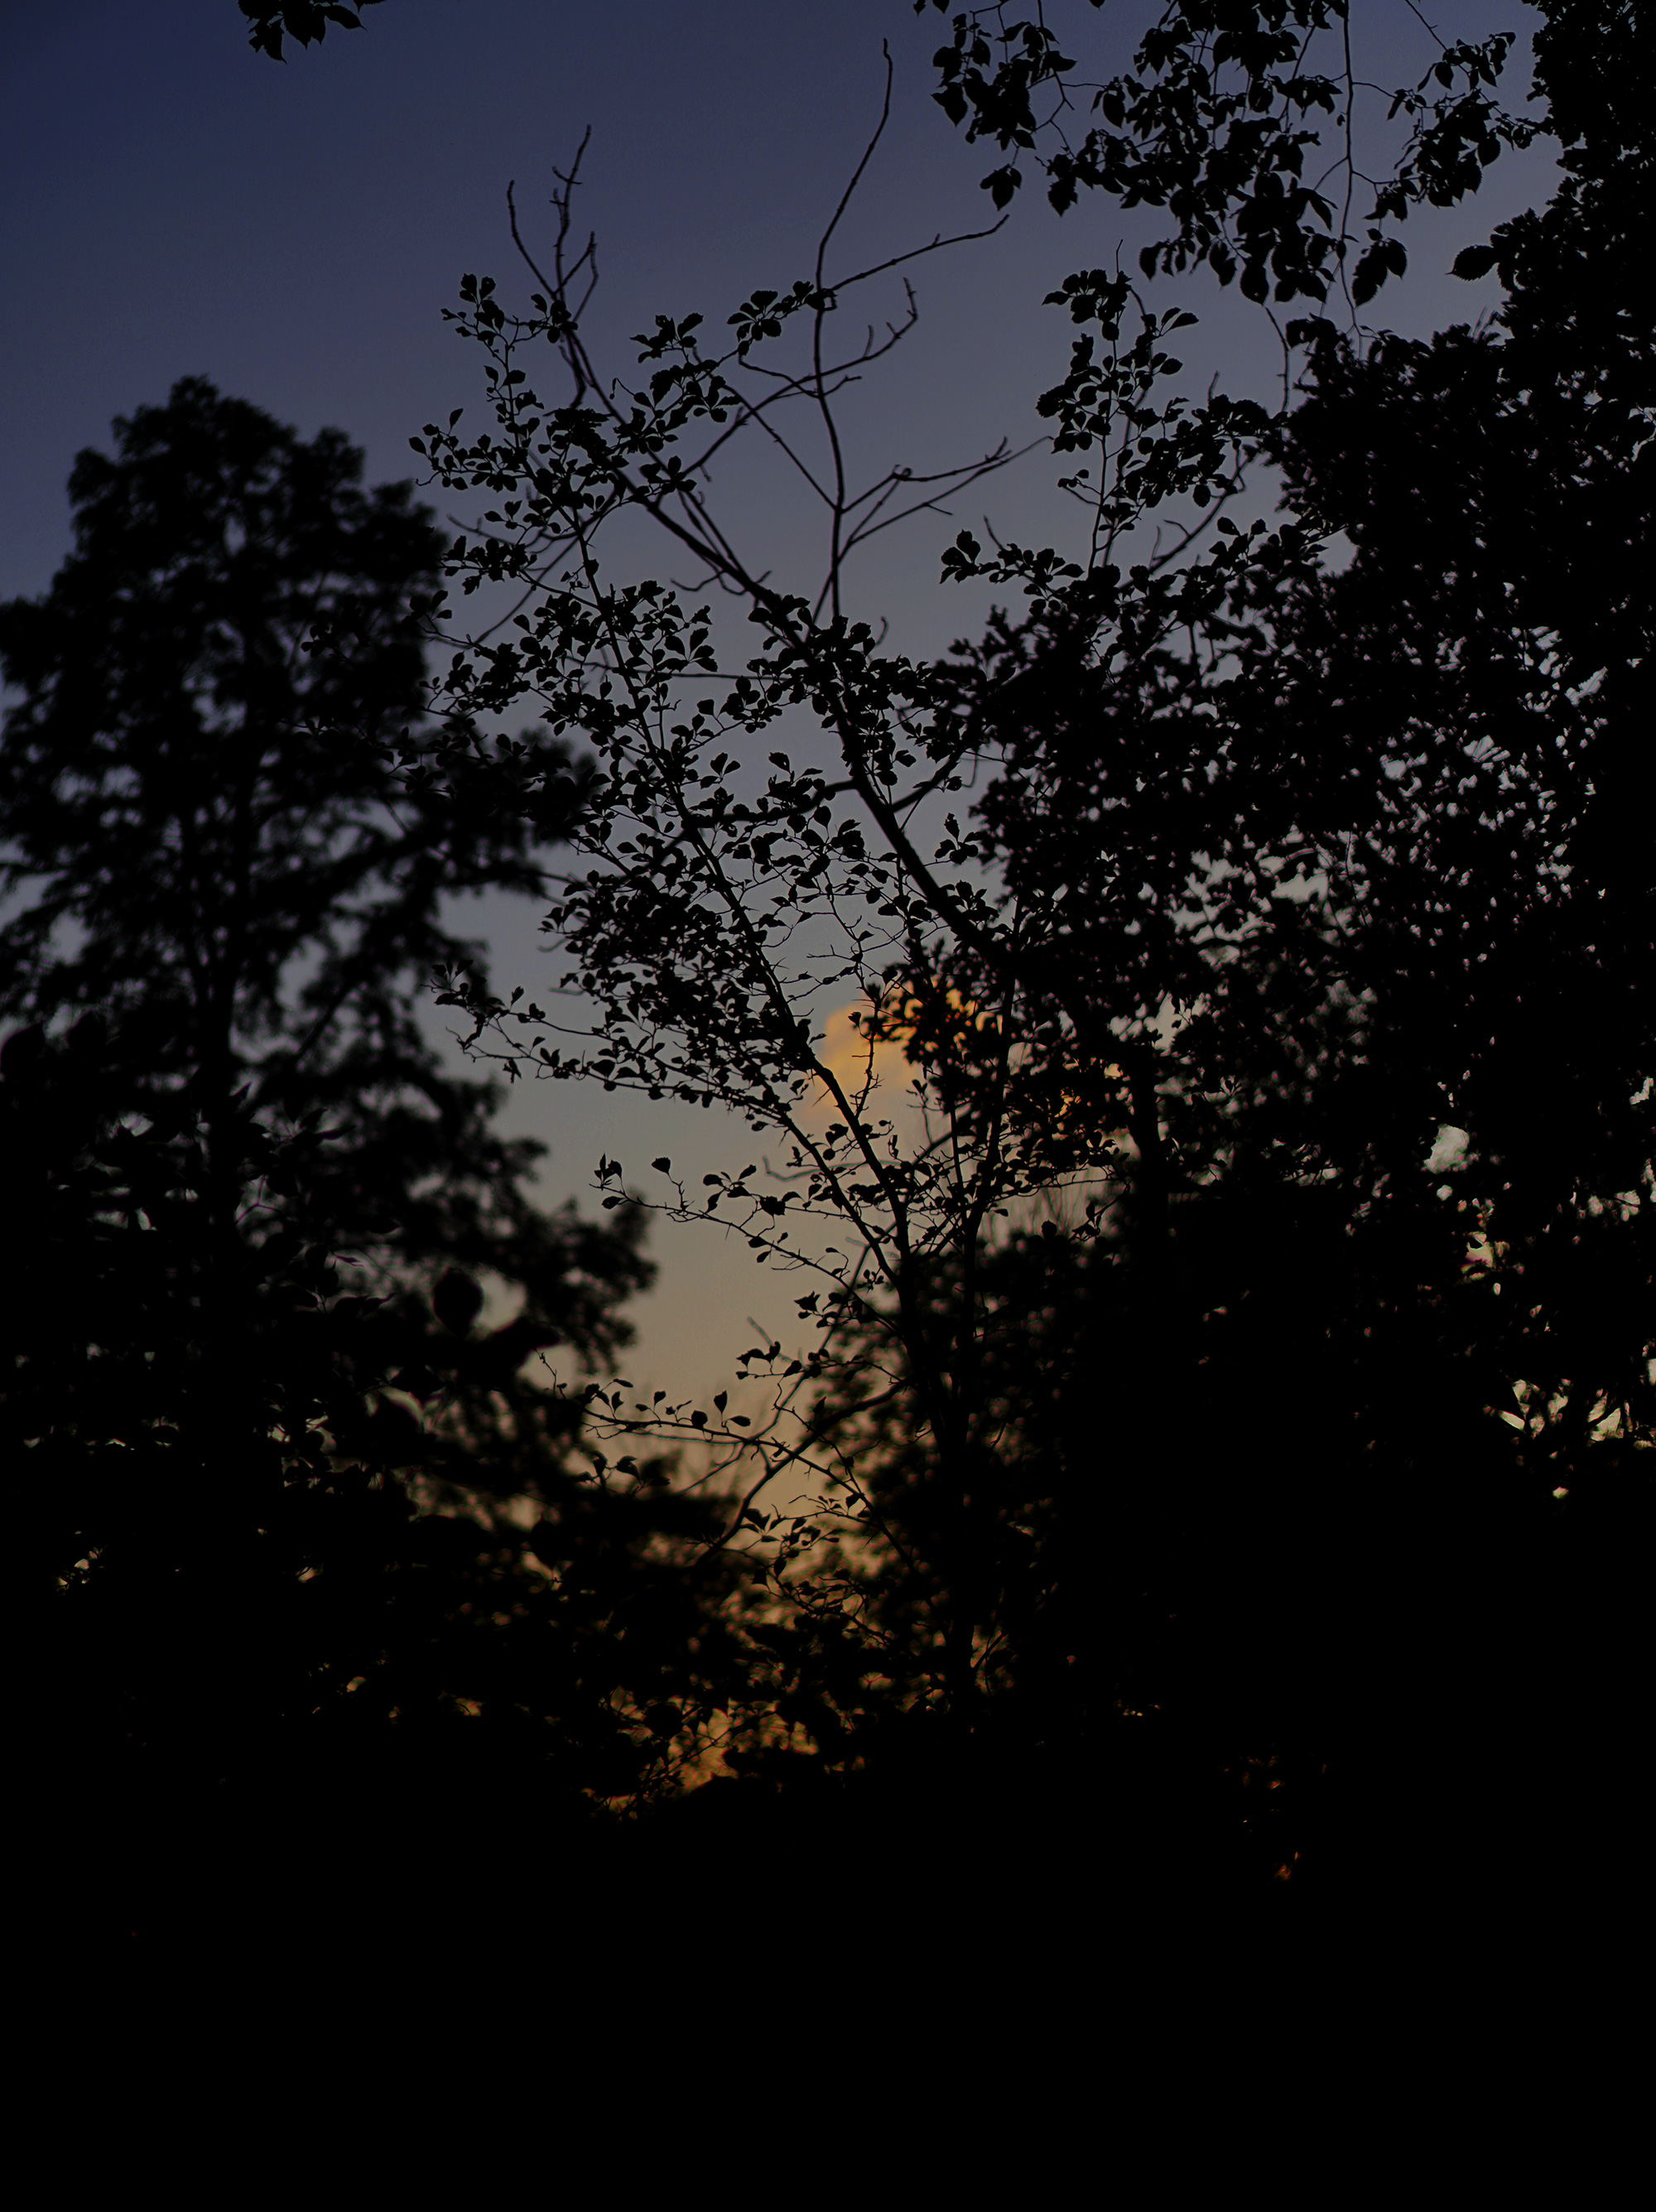 Twilight through silhouetted trees, Chicago IL / Darker than Green